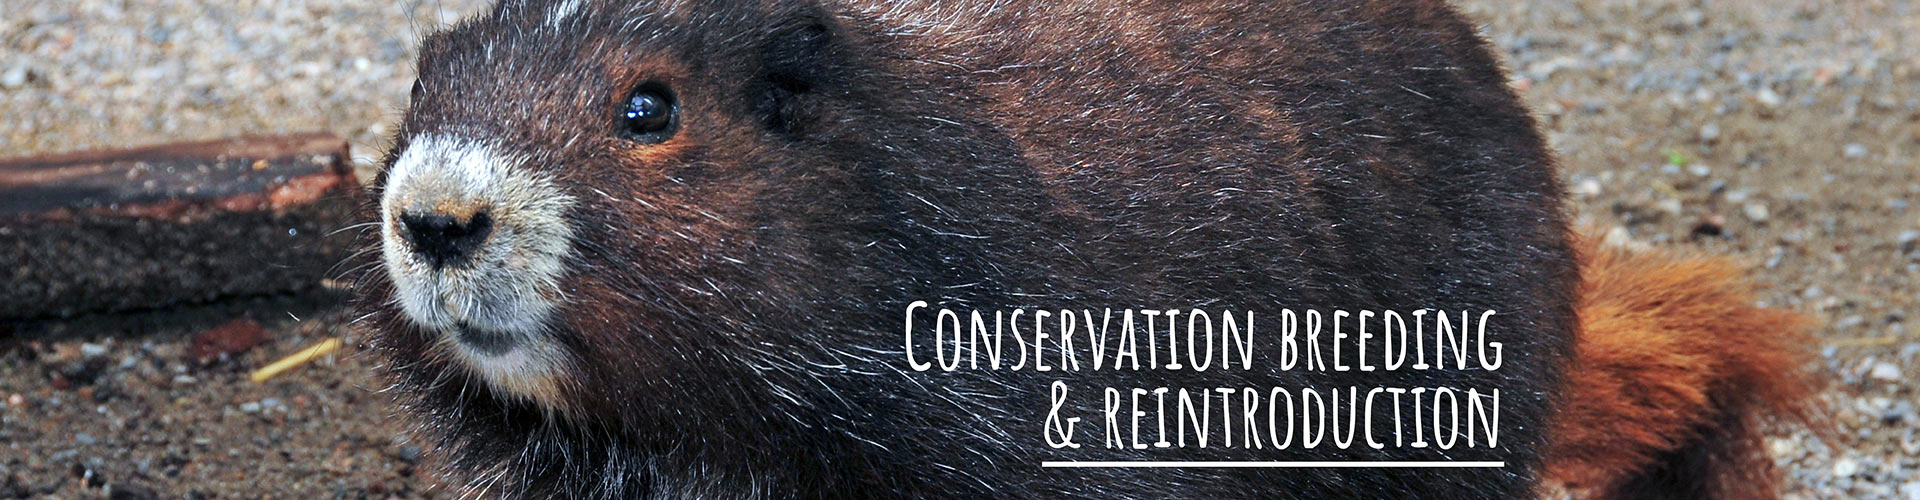 Conservation Breeding and Reintroduction - BFF